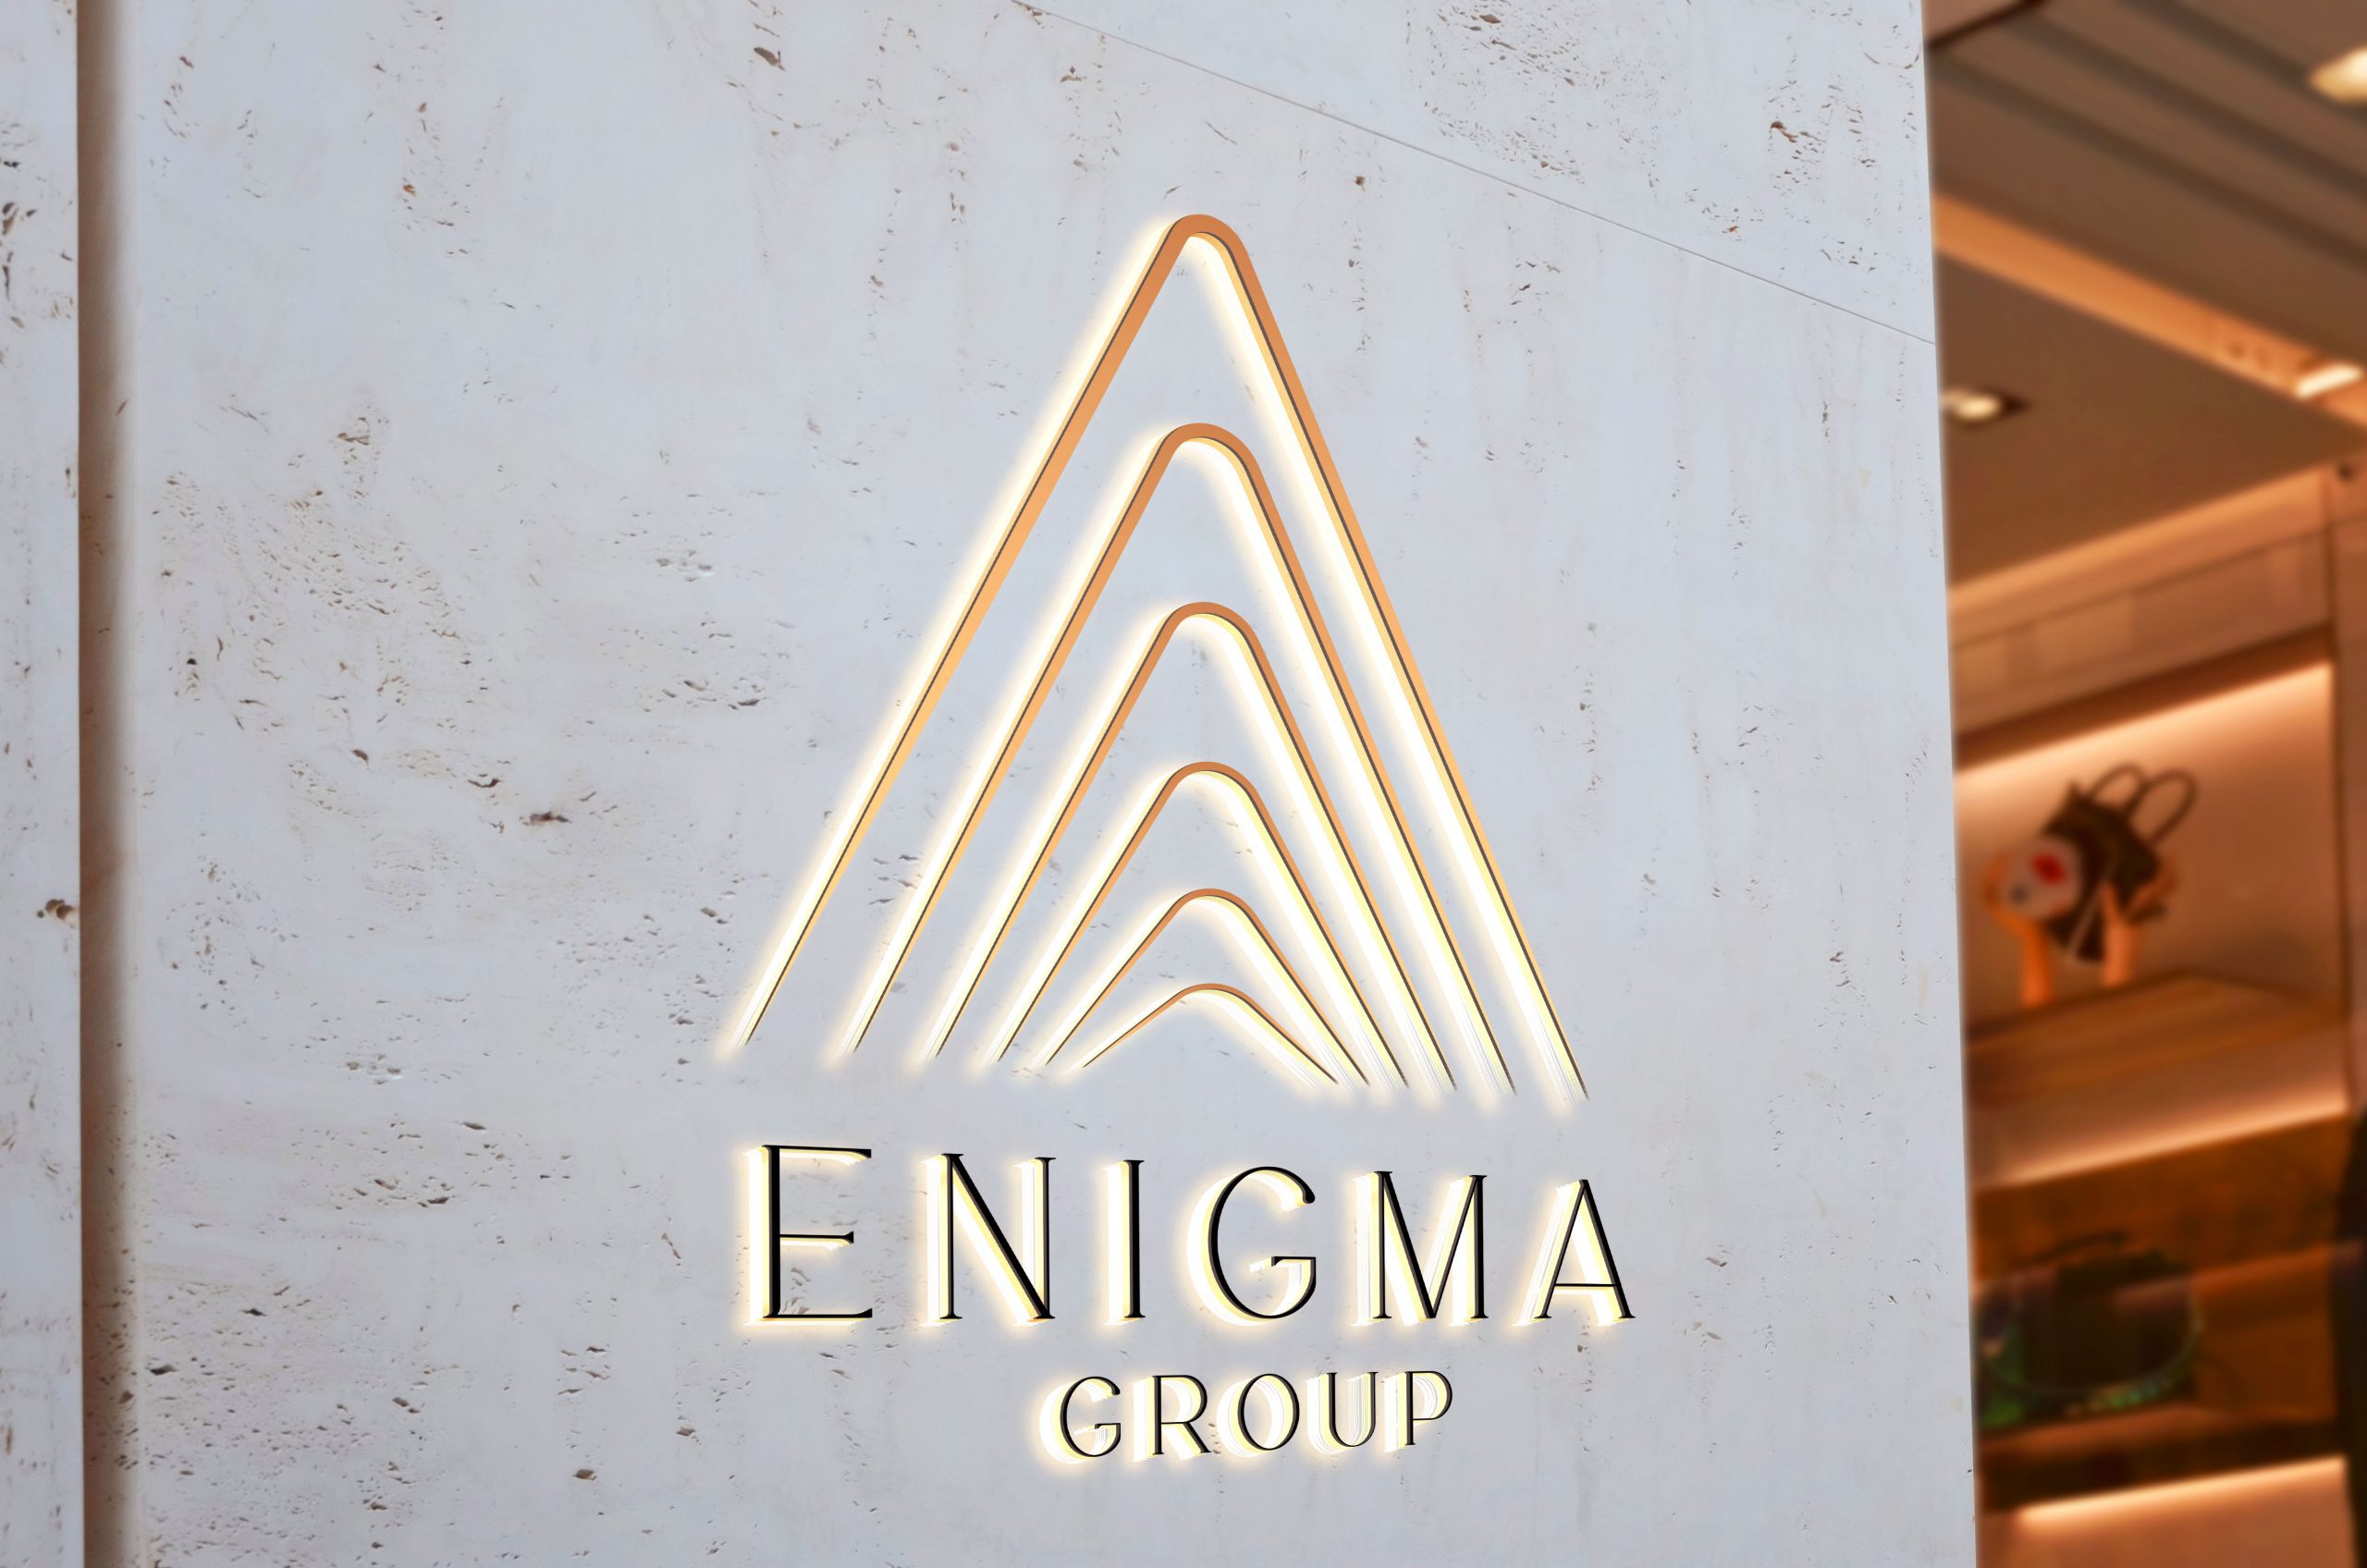 Enigma Group